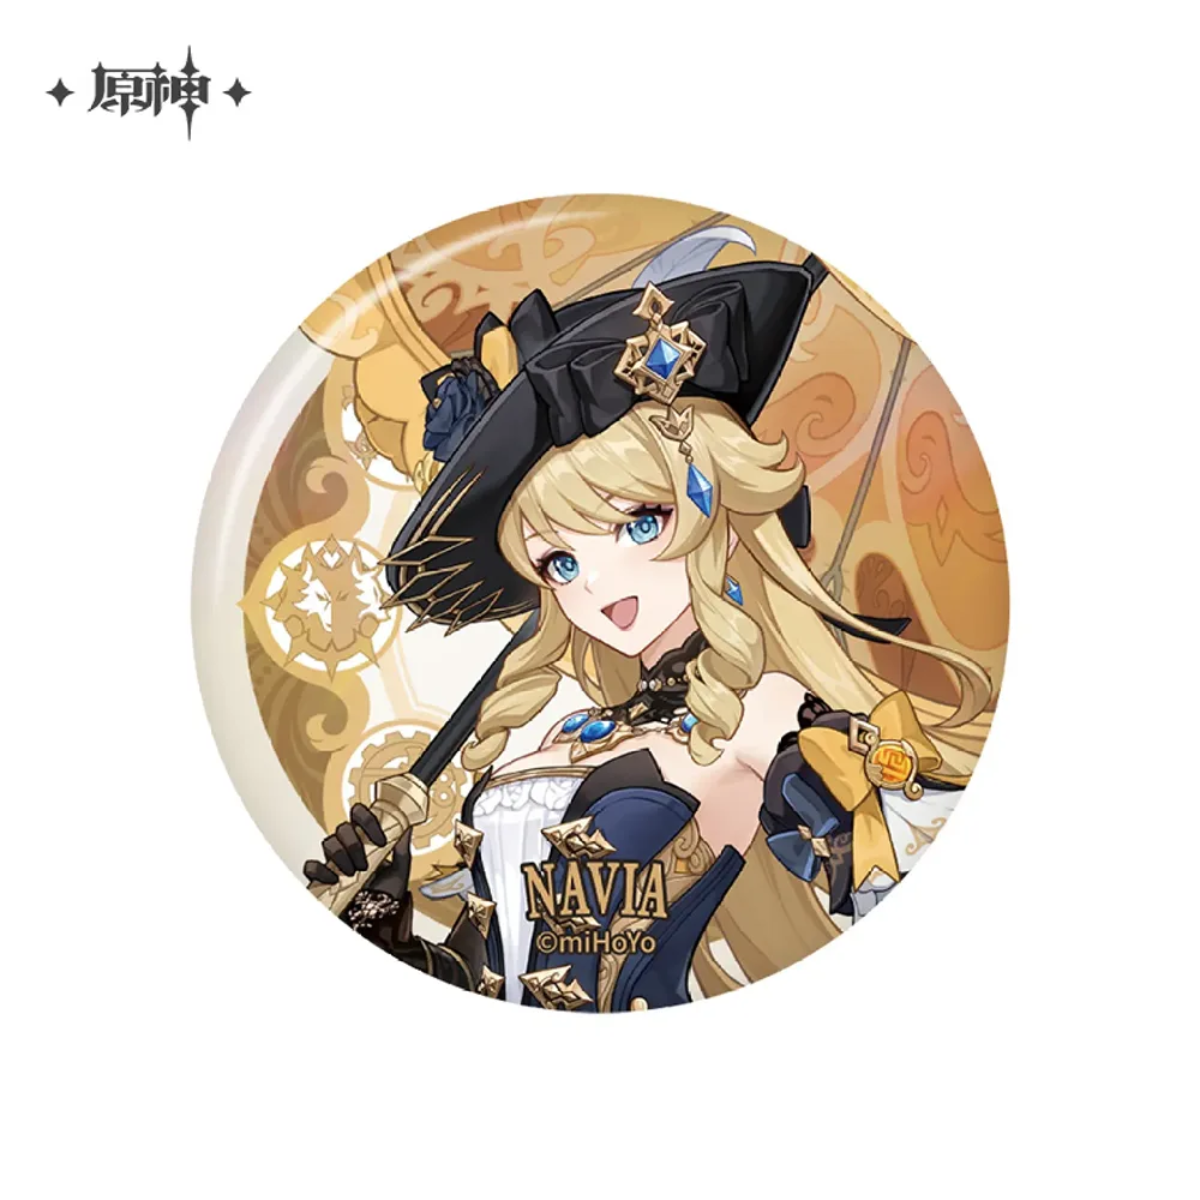 miHoYo Genshin Impact Character Tin Badge Court of Fontaine-Navia-miHoYo-Ace Cards &amp; Collectibles